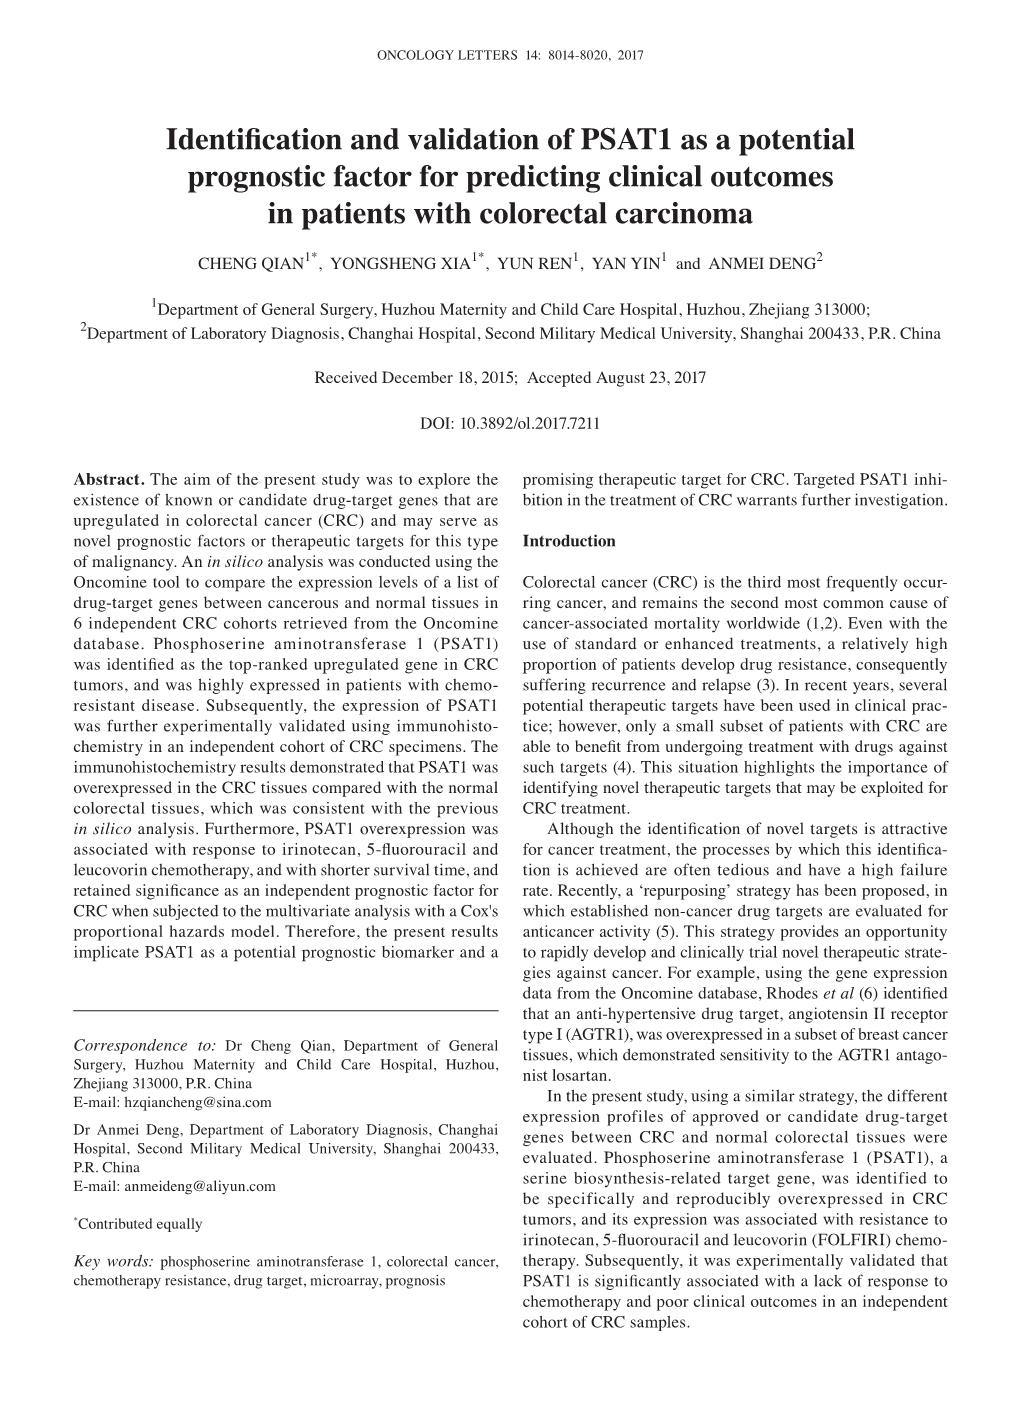 Identification and Validation of PSAT1 As a Potential Prognostic Factor for Predicting Clinical Outcomes in Patients with Colorectal Carcinoma